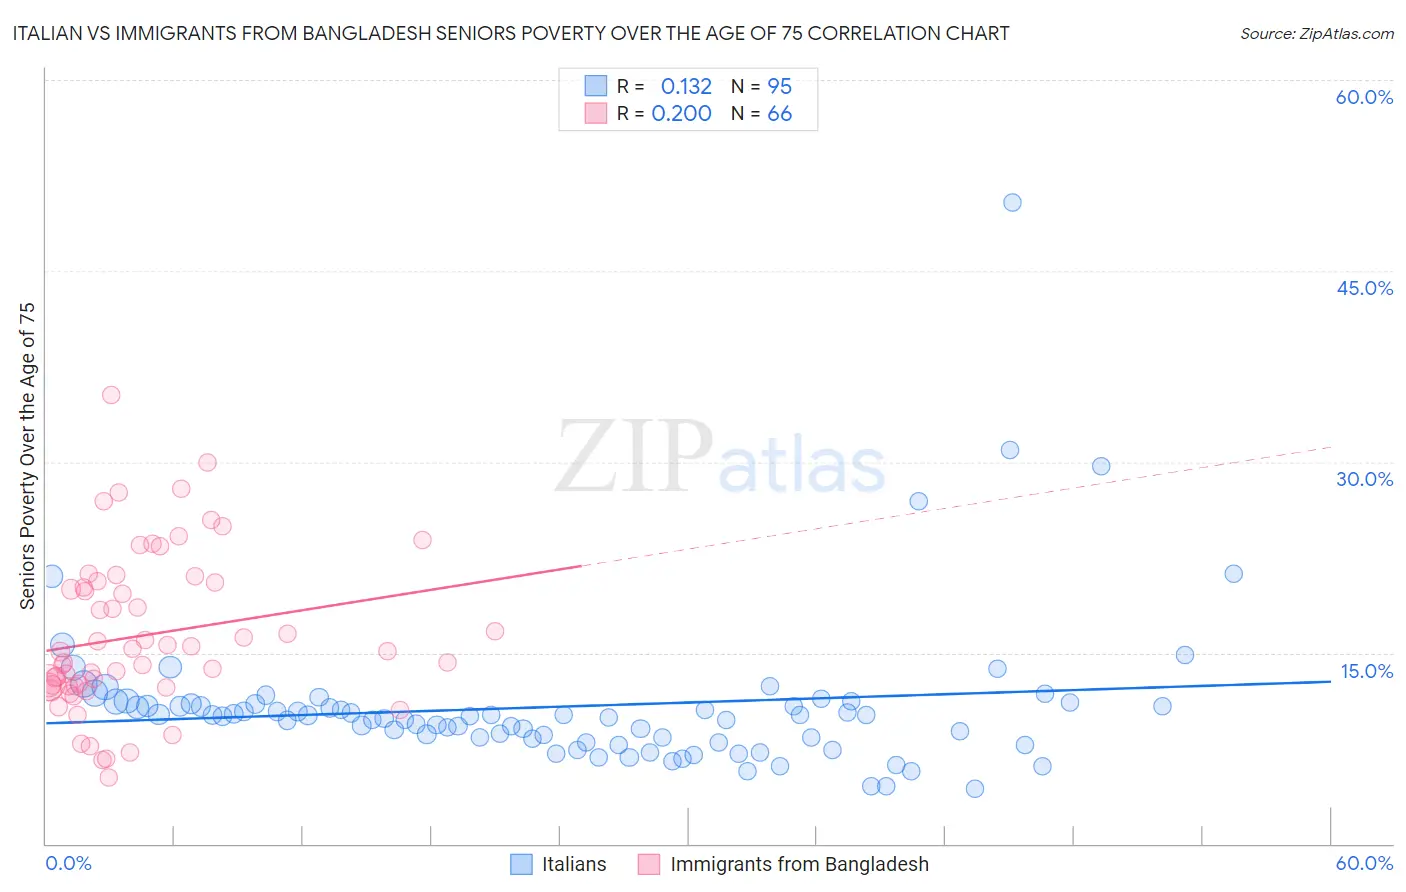 Italian vs Immigrants from Bangladesh Seniors Poverty Over the Age of 75